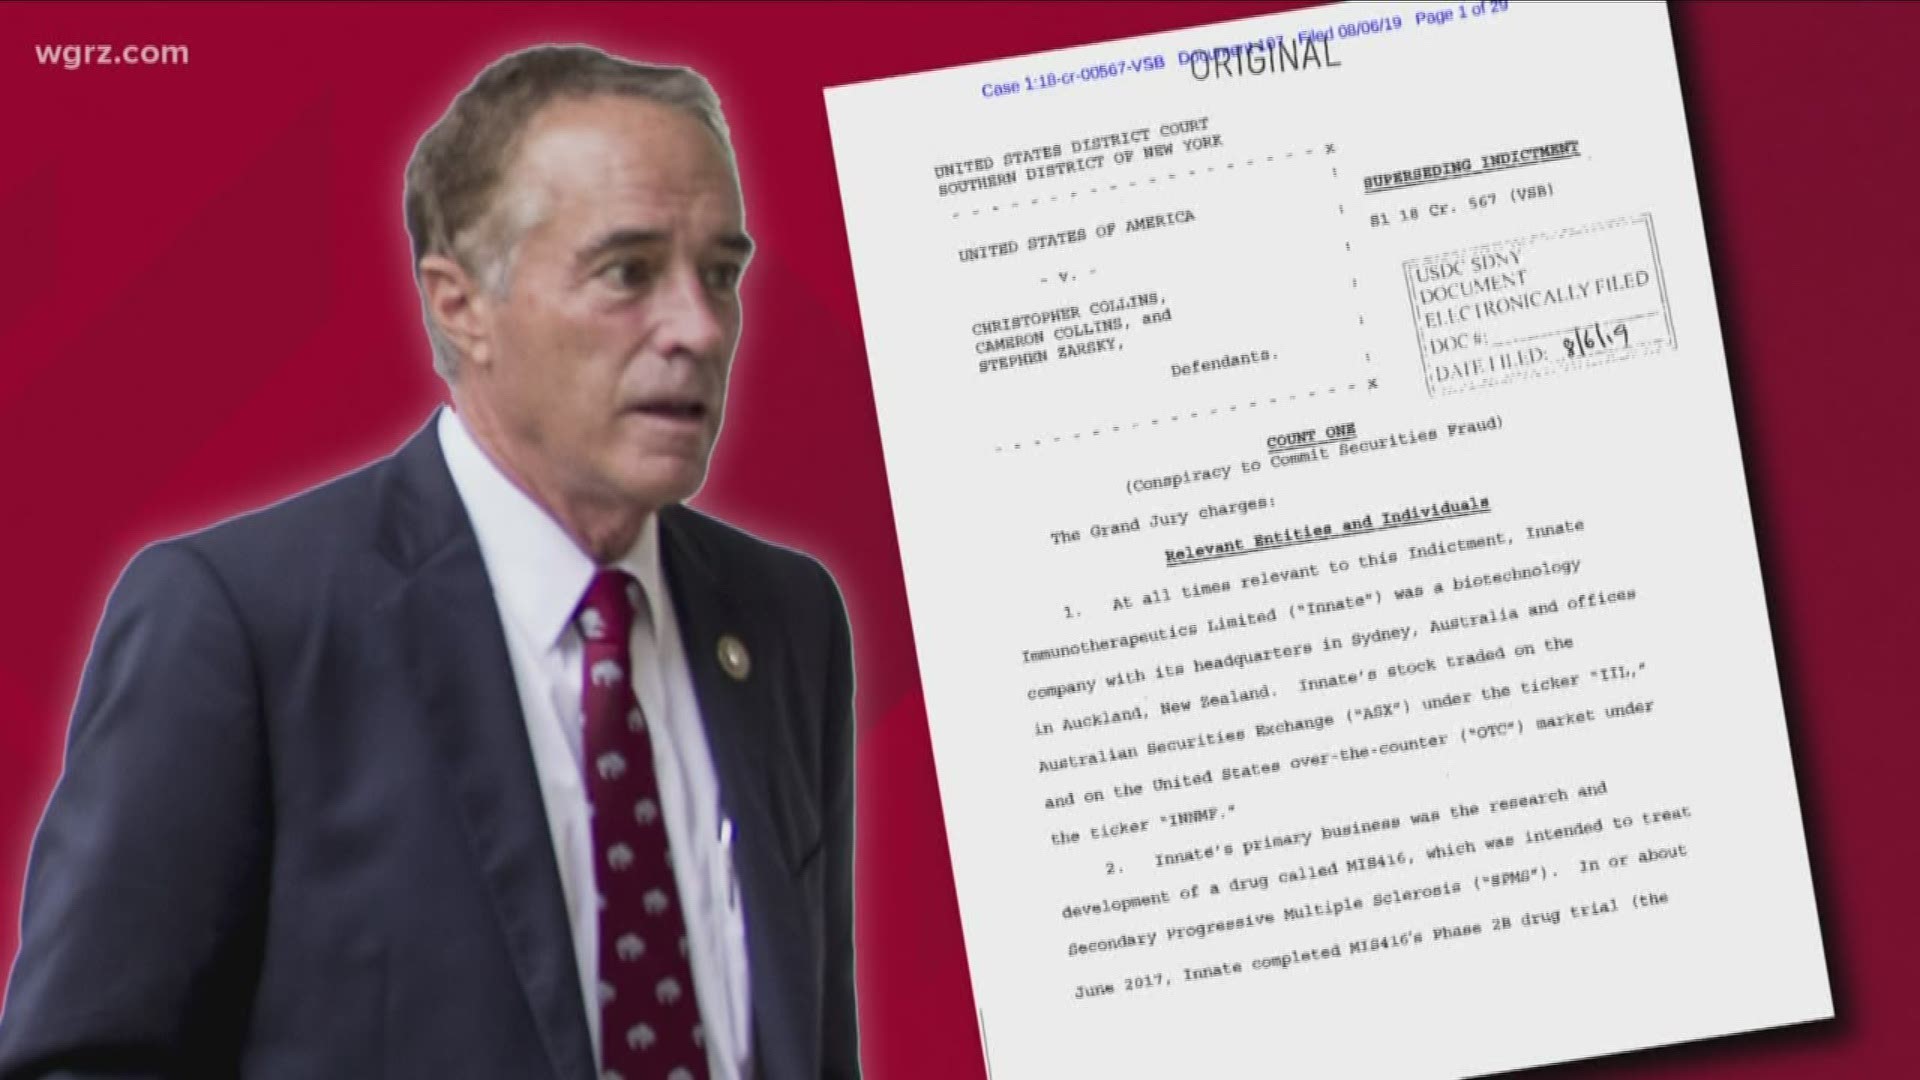 Western New York Congressman Chris Collins is still under federal indictment tonight but several charges against him were dropped.